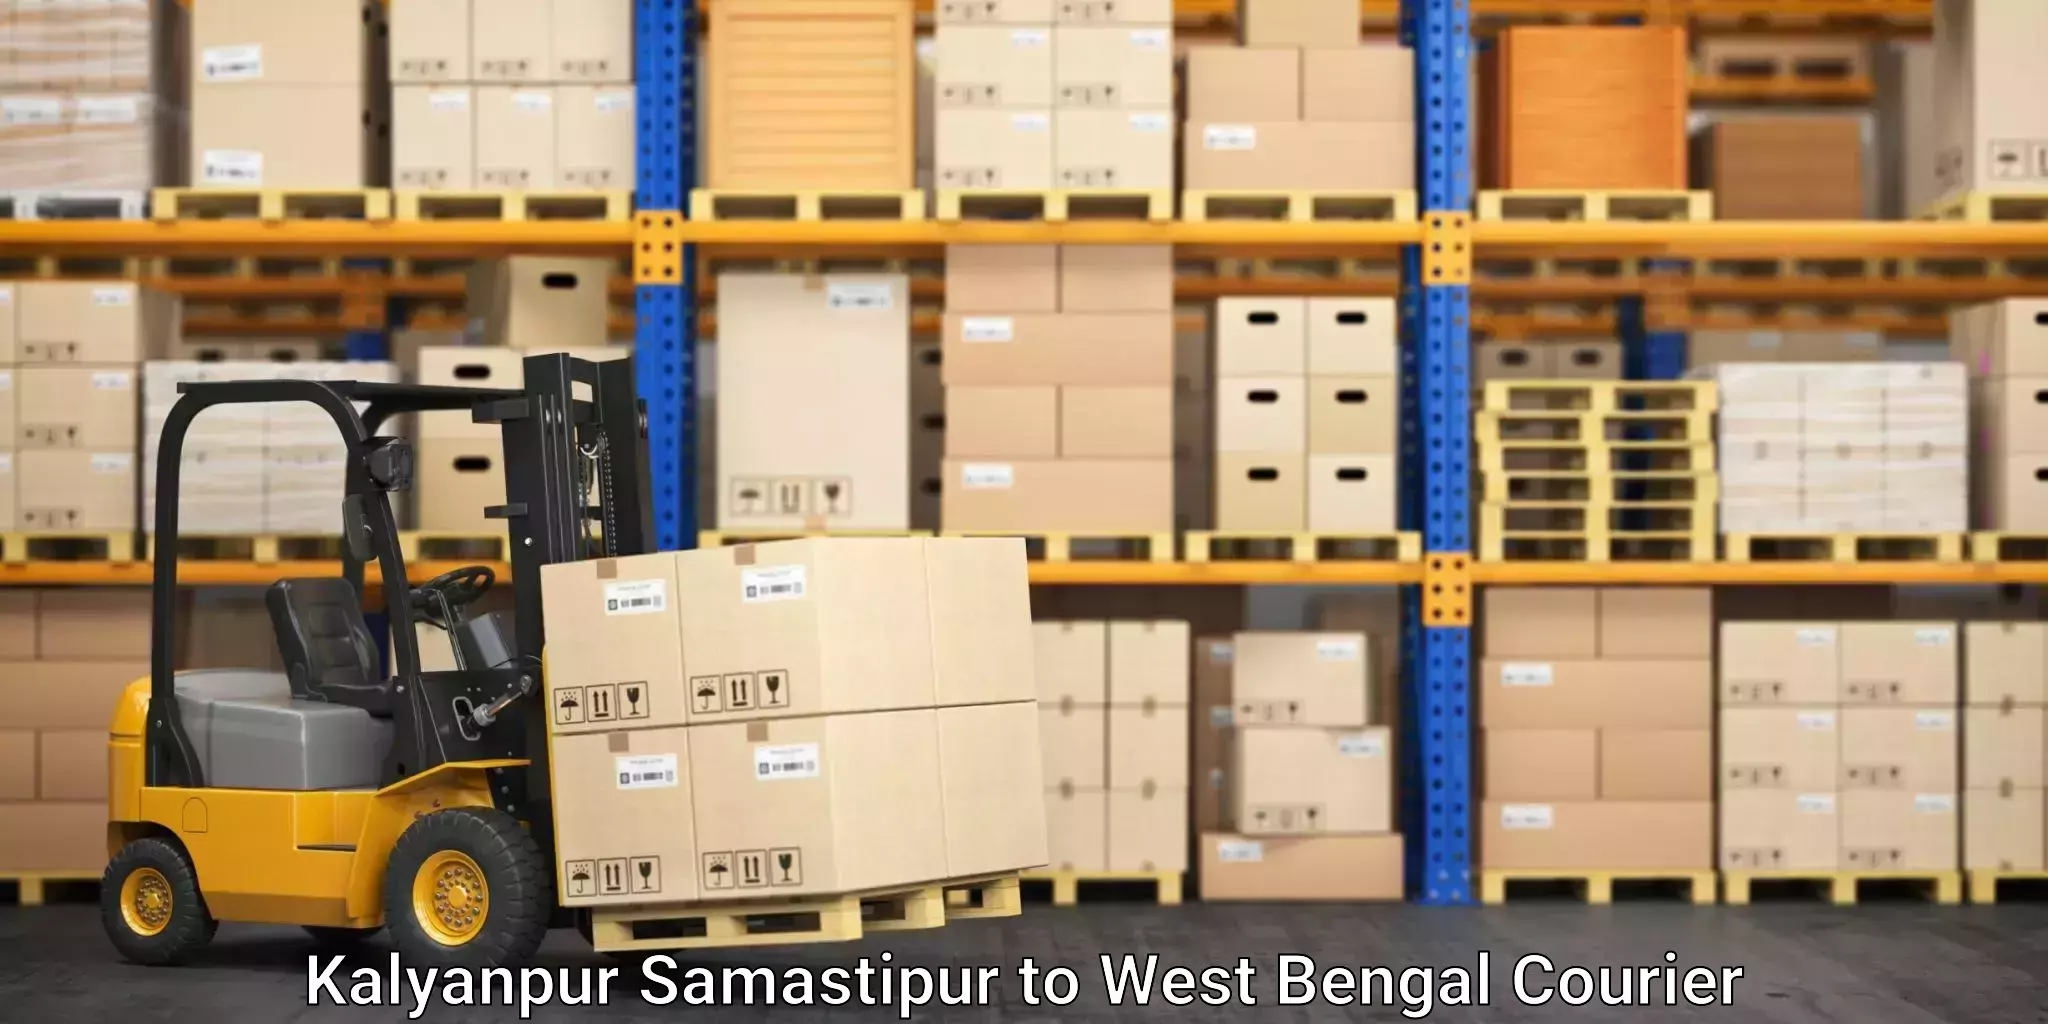 Hassle-free relocation Kalyanpur Samastipur to Chalsa